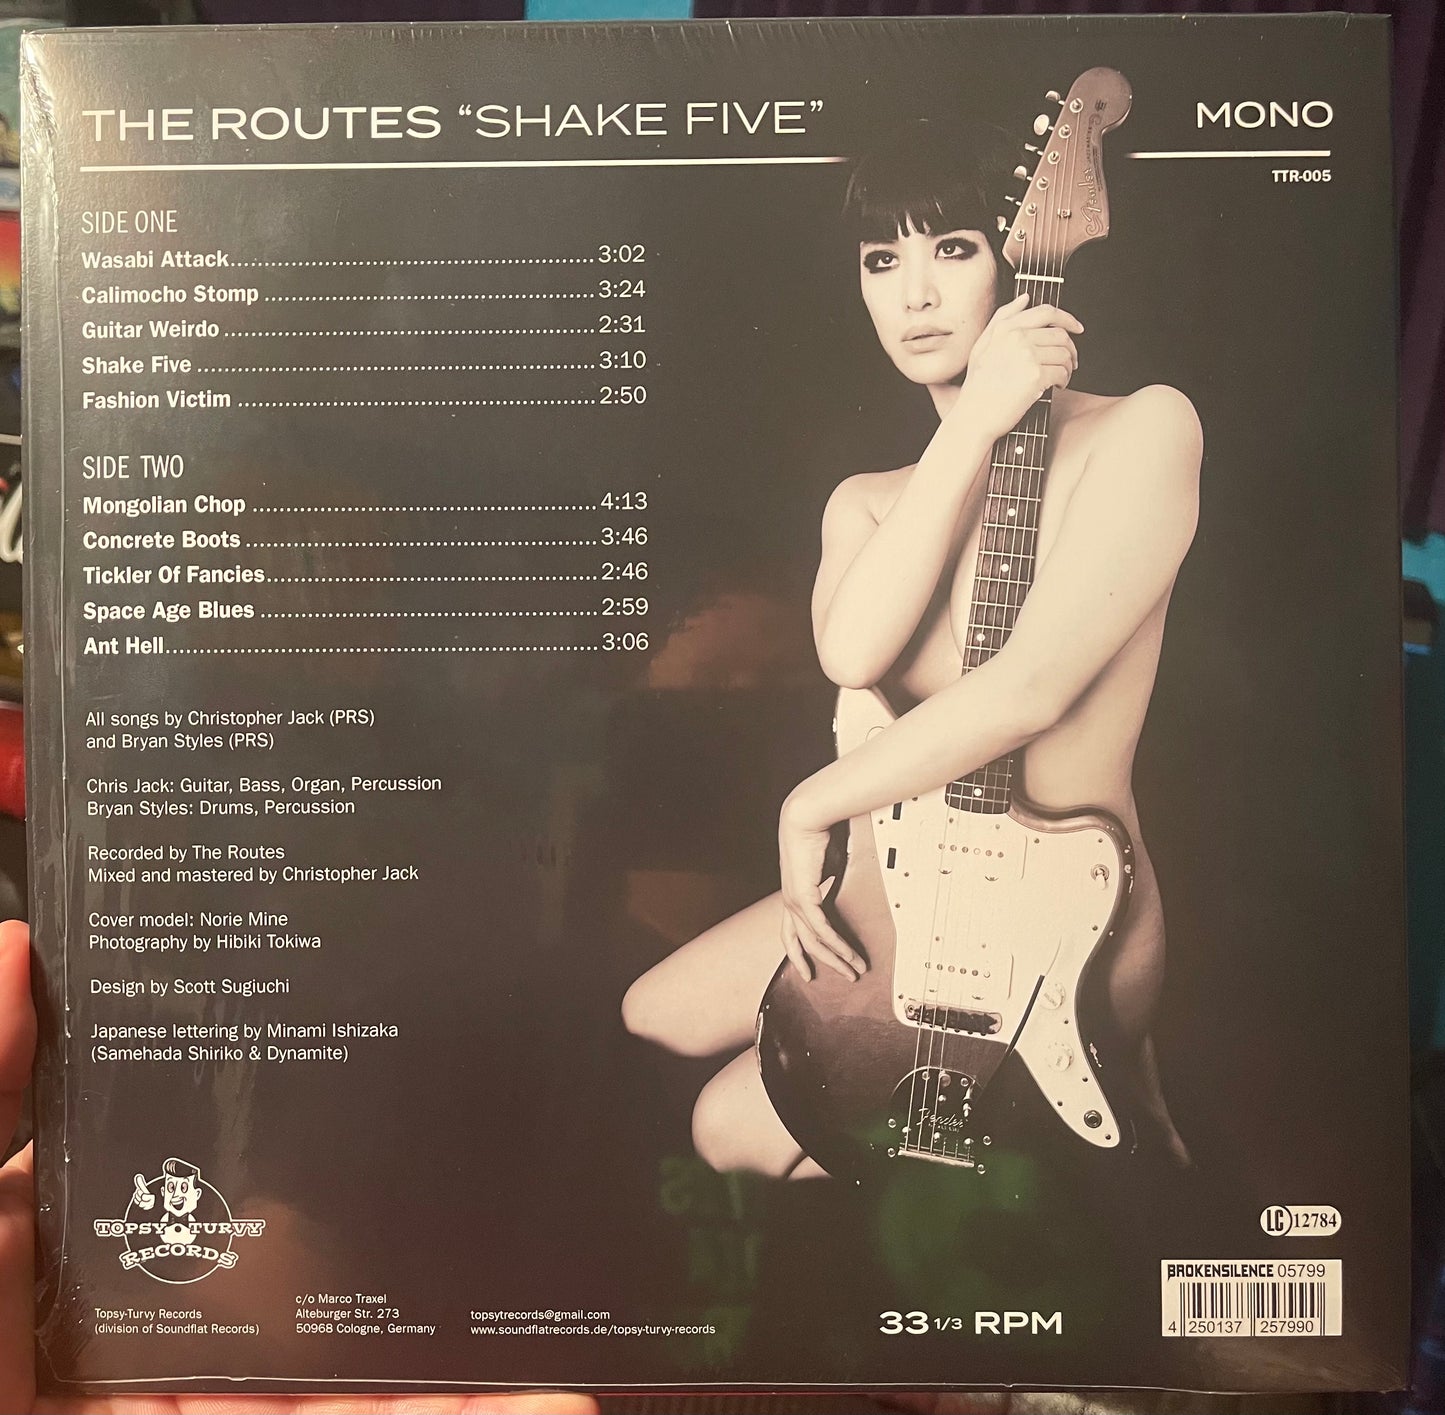 OMRDST-001 The Routes “Shake Five” LP (12 inch Vinyl, Import)